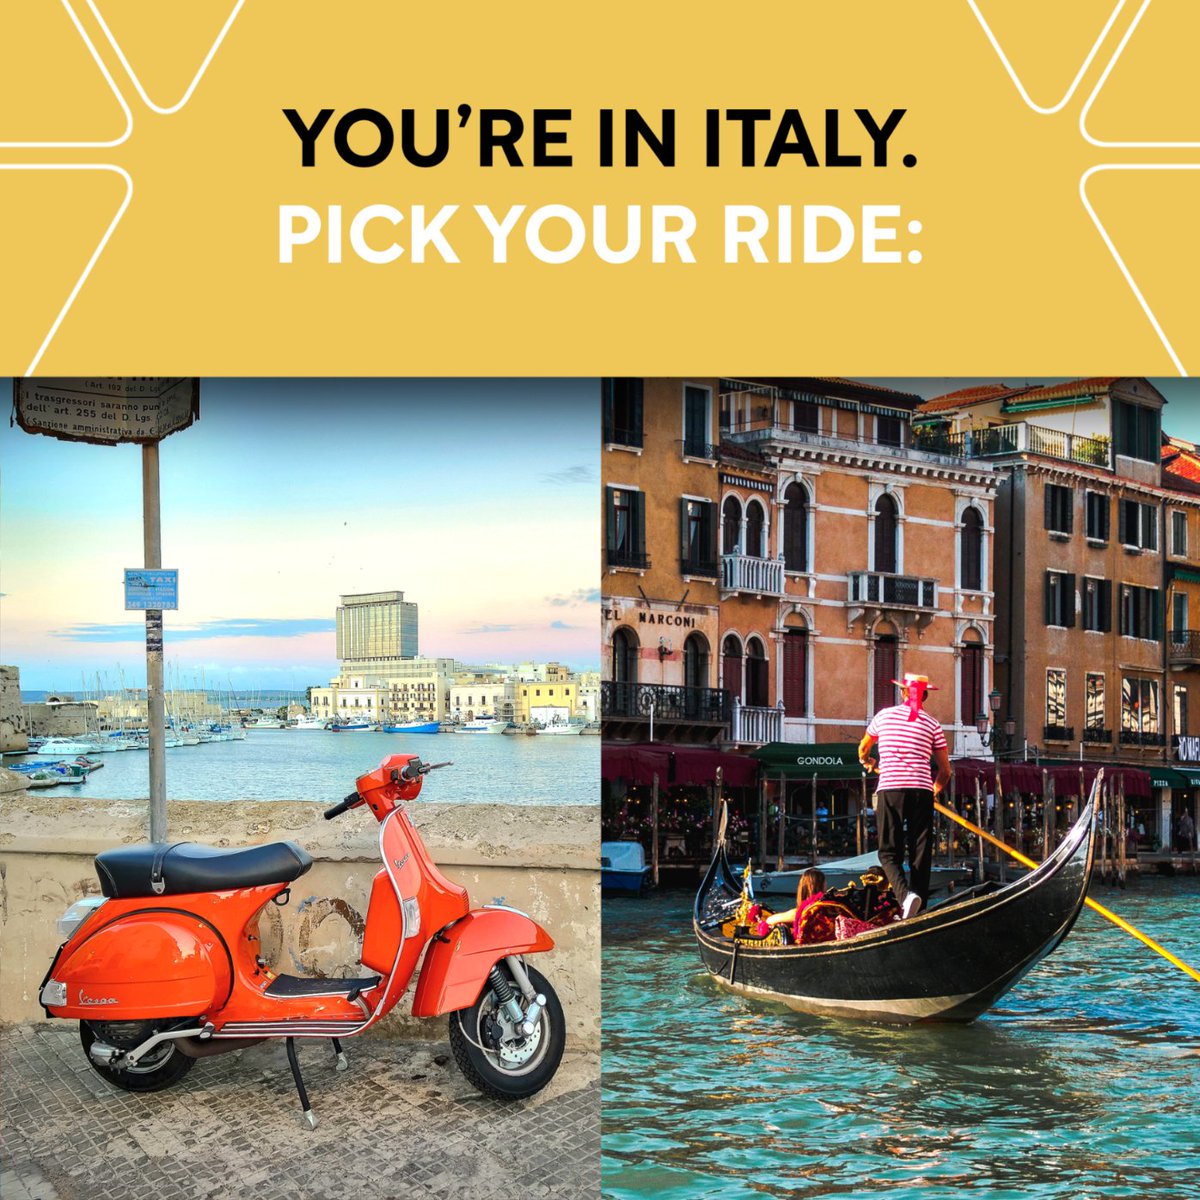 How are you getting to the trattoria? Comment below whether you’re riding or rowing!